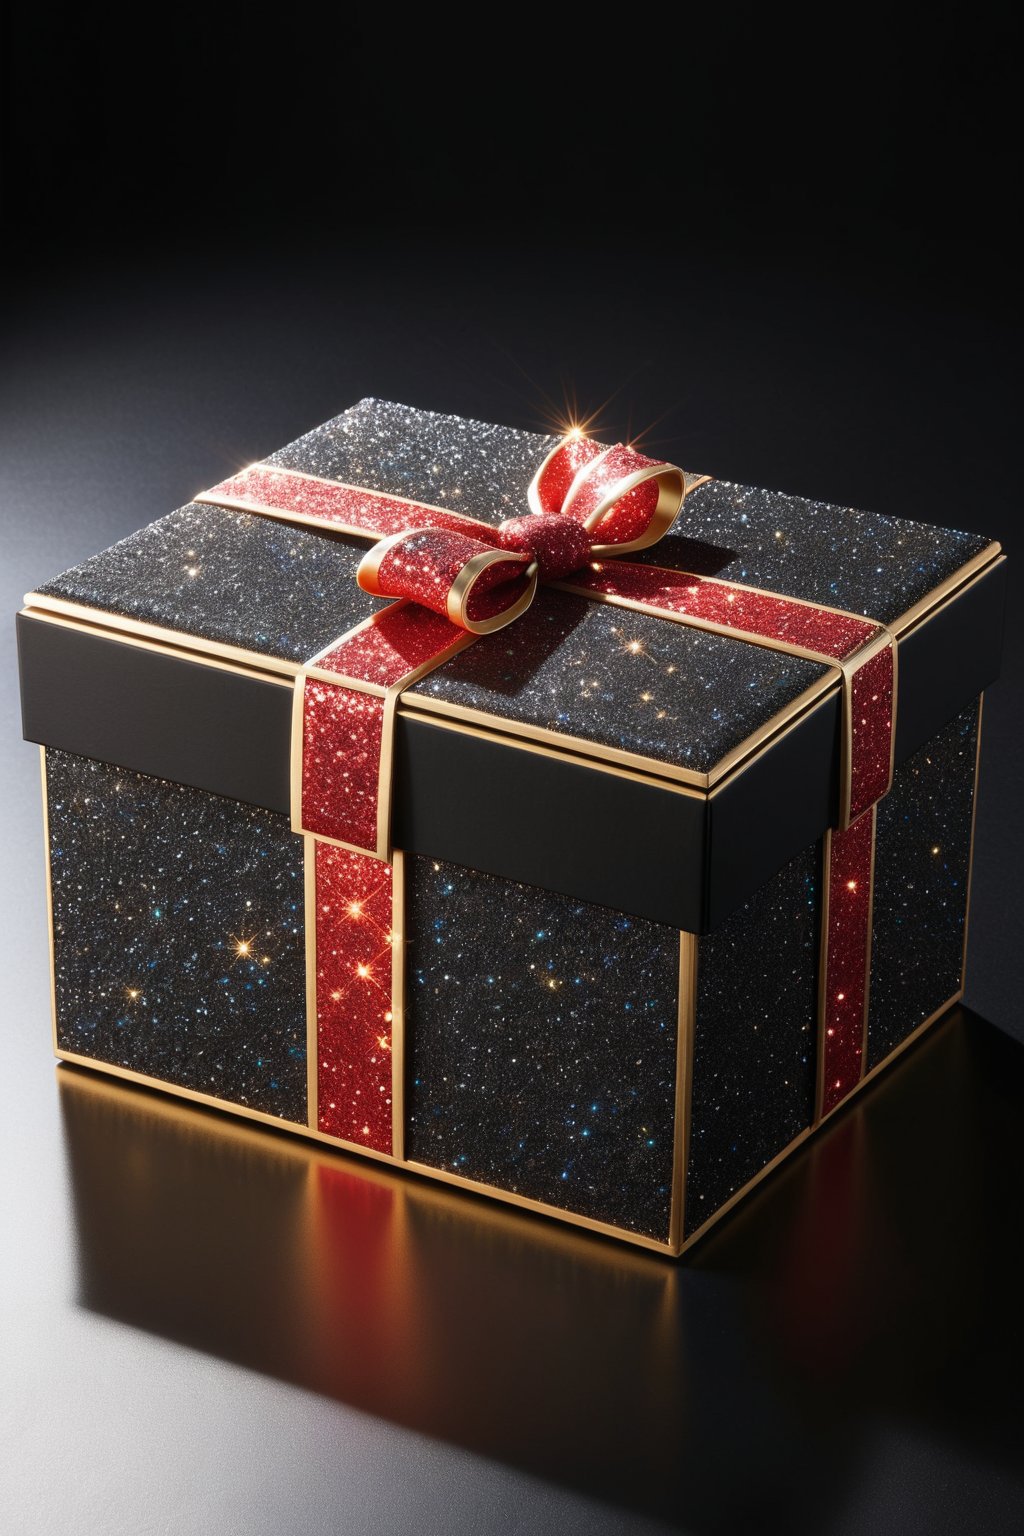 A majestic black gift box adorned with antique flair, in its top a note with the text ("TA 1 Year":1.5) in black thick letters. A striking red topknot adorns the lid, adding a pop of vibrant color to the overall design. The box itself is crafted with meticulous attention to detail, showcasing a hyper-realistic finish that invites tactile exploration. Against a dark background, the box's intricate details and rich textures leap forth in high-definition glory over a modern table, soft light from above,glitter